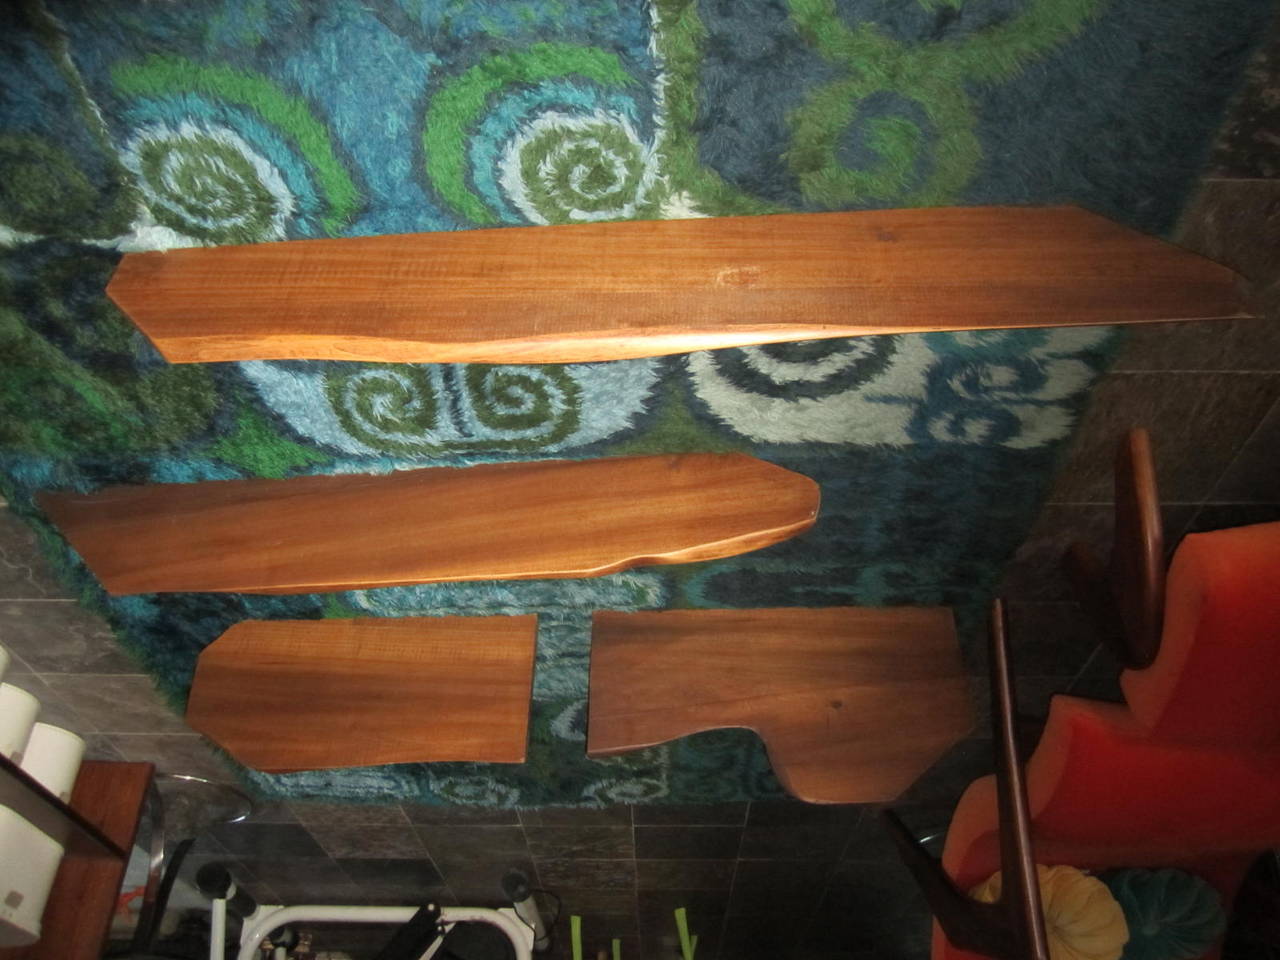 Fabulous set of four different size solid walnut sculptural Nakashima style floating shelves. Each one is a different size and shape and can be arranged in many ways. The two largest measure 48